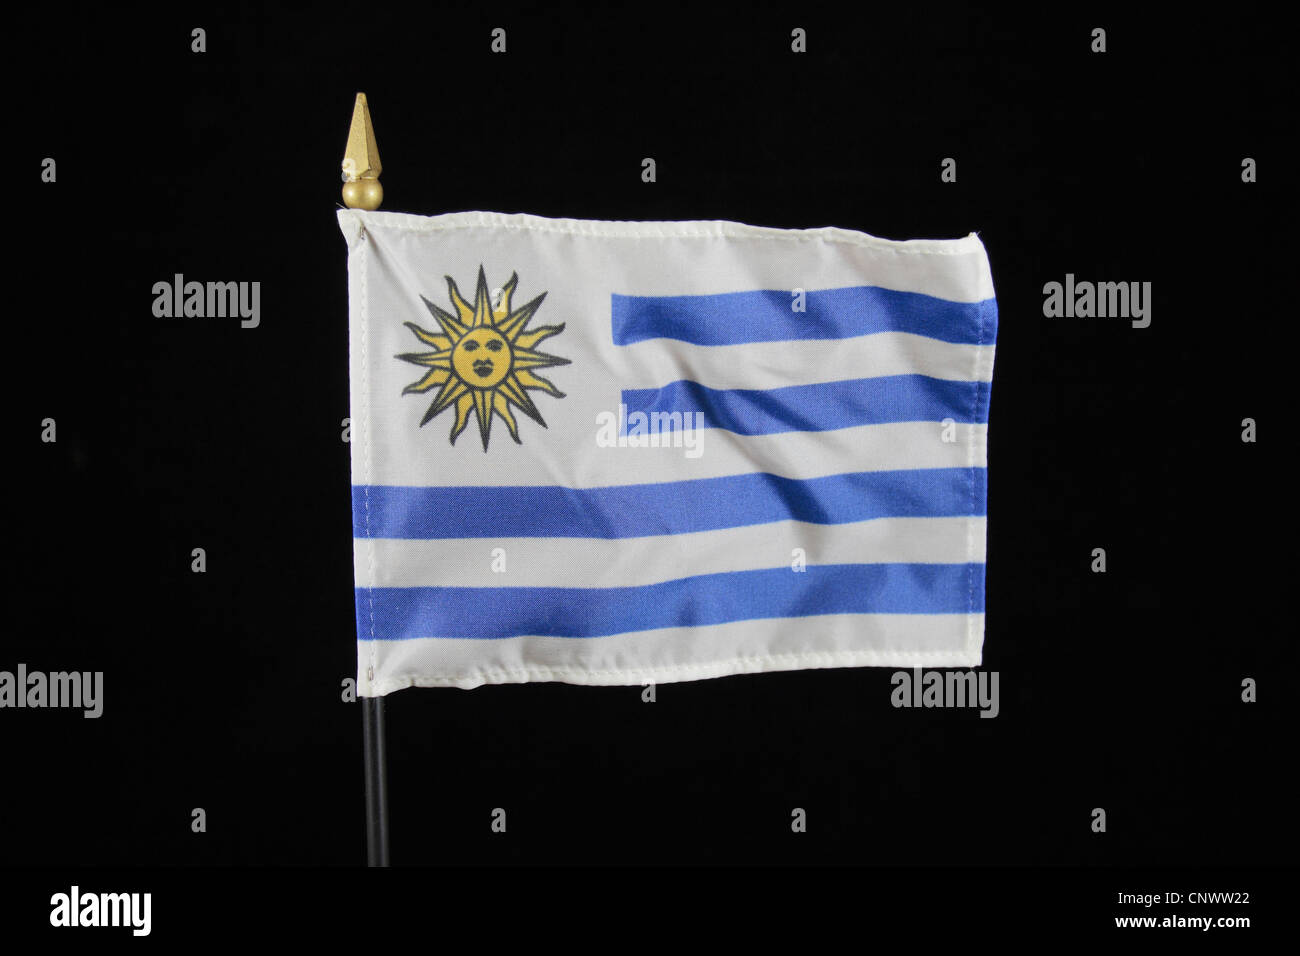 The national flag of Uruguay on a black background. Stock Photo